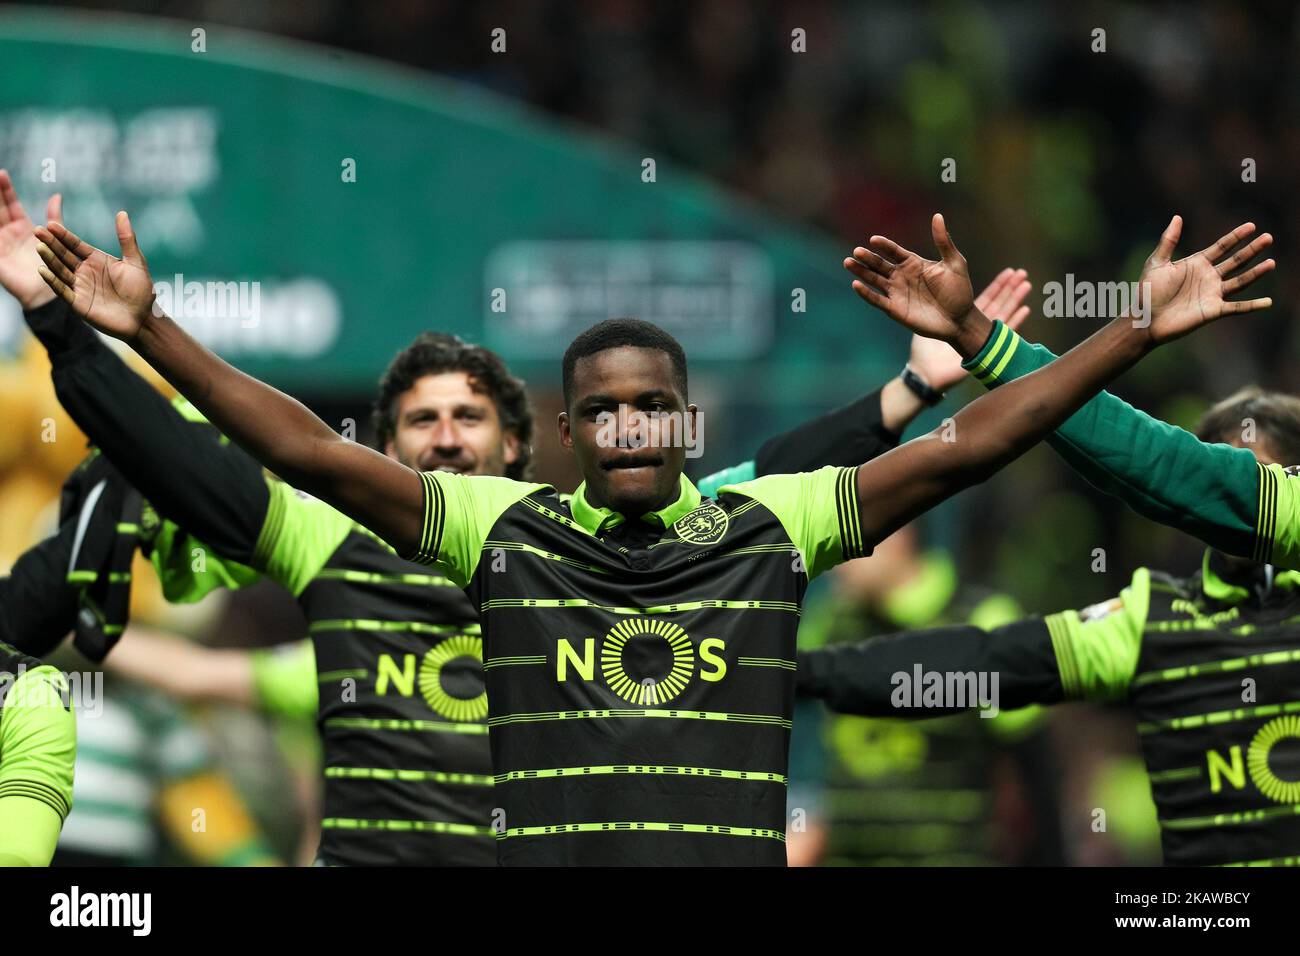 Sporting's Portuguese midfielder William Carvalho (C) celebrates the victory in the game during the Portuguese League Cup 2017/18 Final, match between Vitoria FC and Sporting CP, at Municipal de Braga Stadium in Braga on January 27, 2018. (Photo by Paulo Oliveira / DPI / NurPhoto) Stock Photo